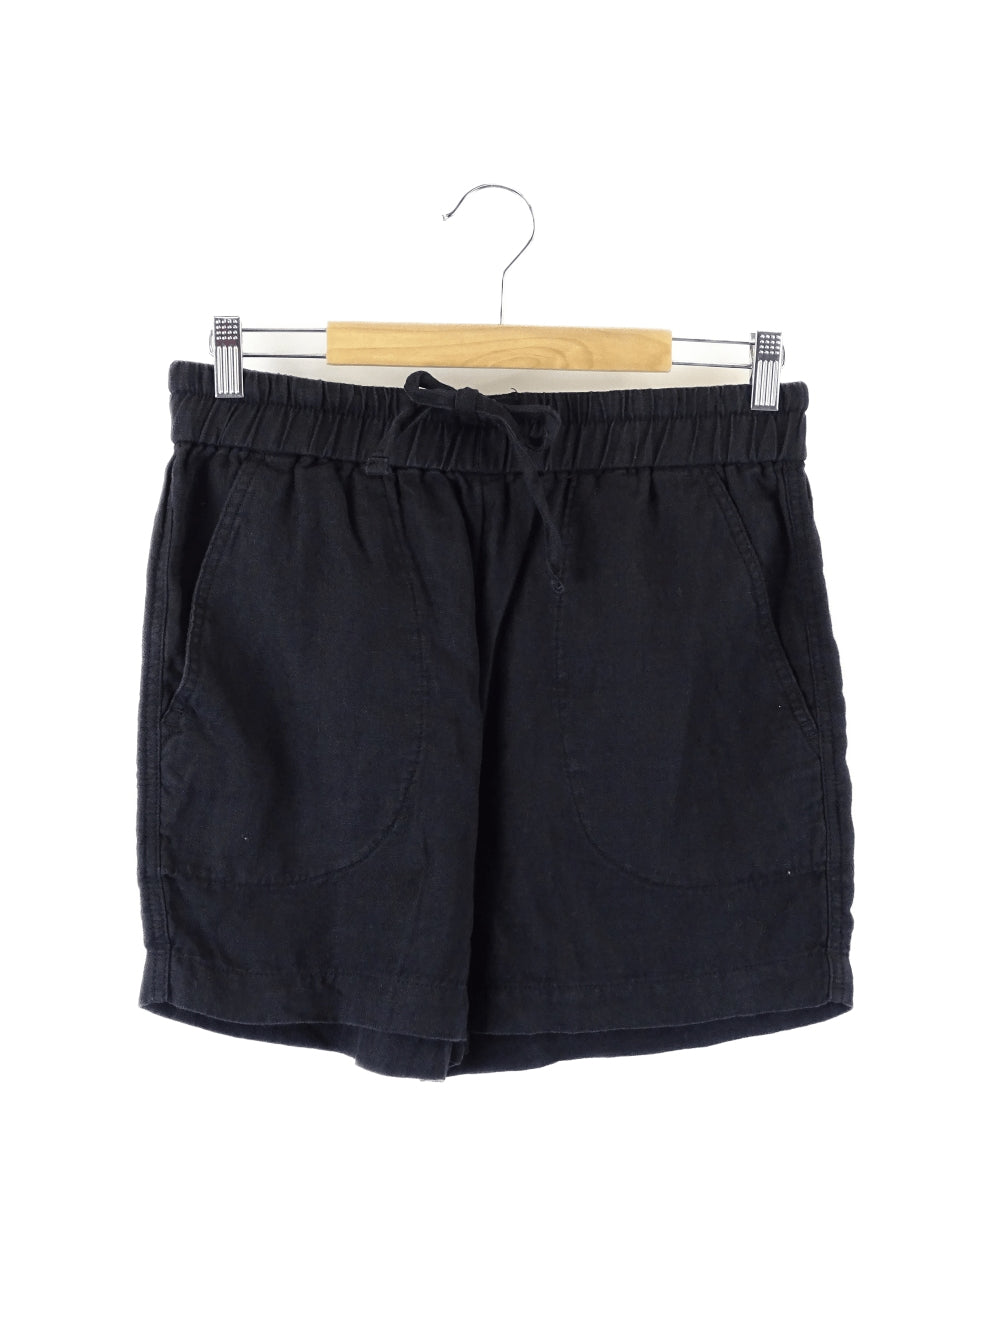 Country Road Black French Linen Shorts 10